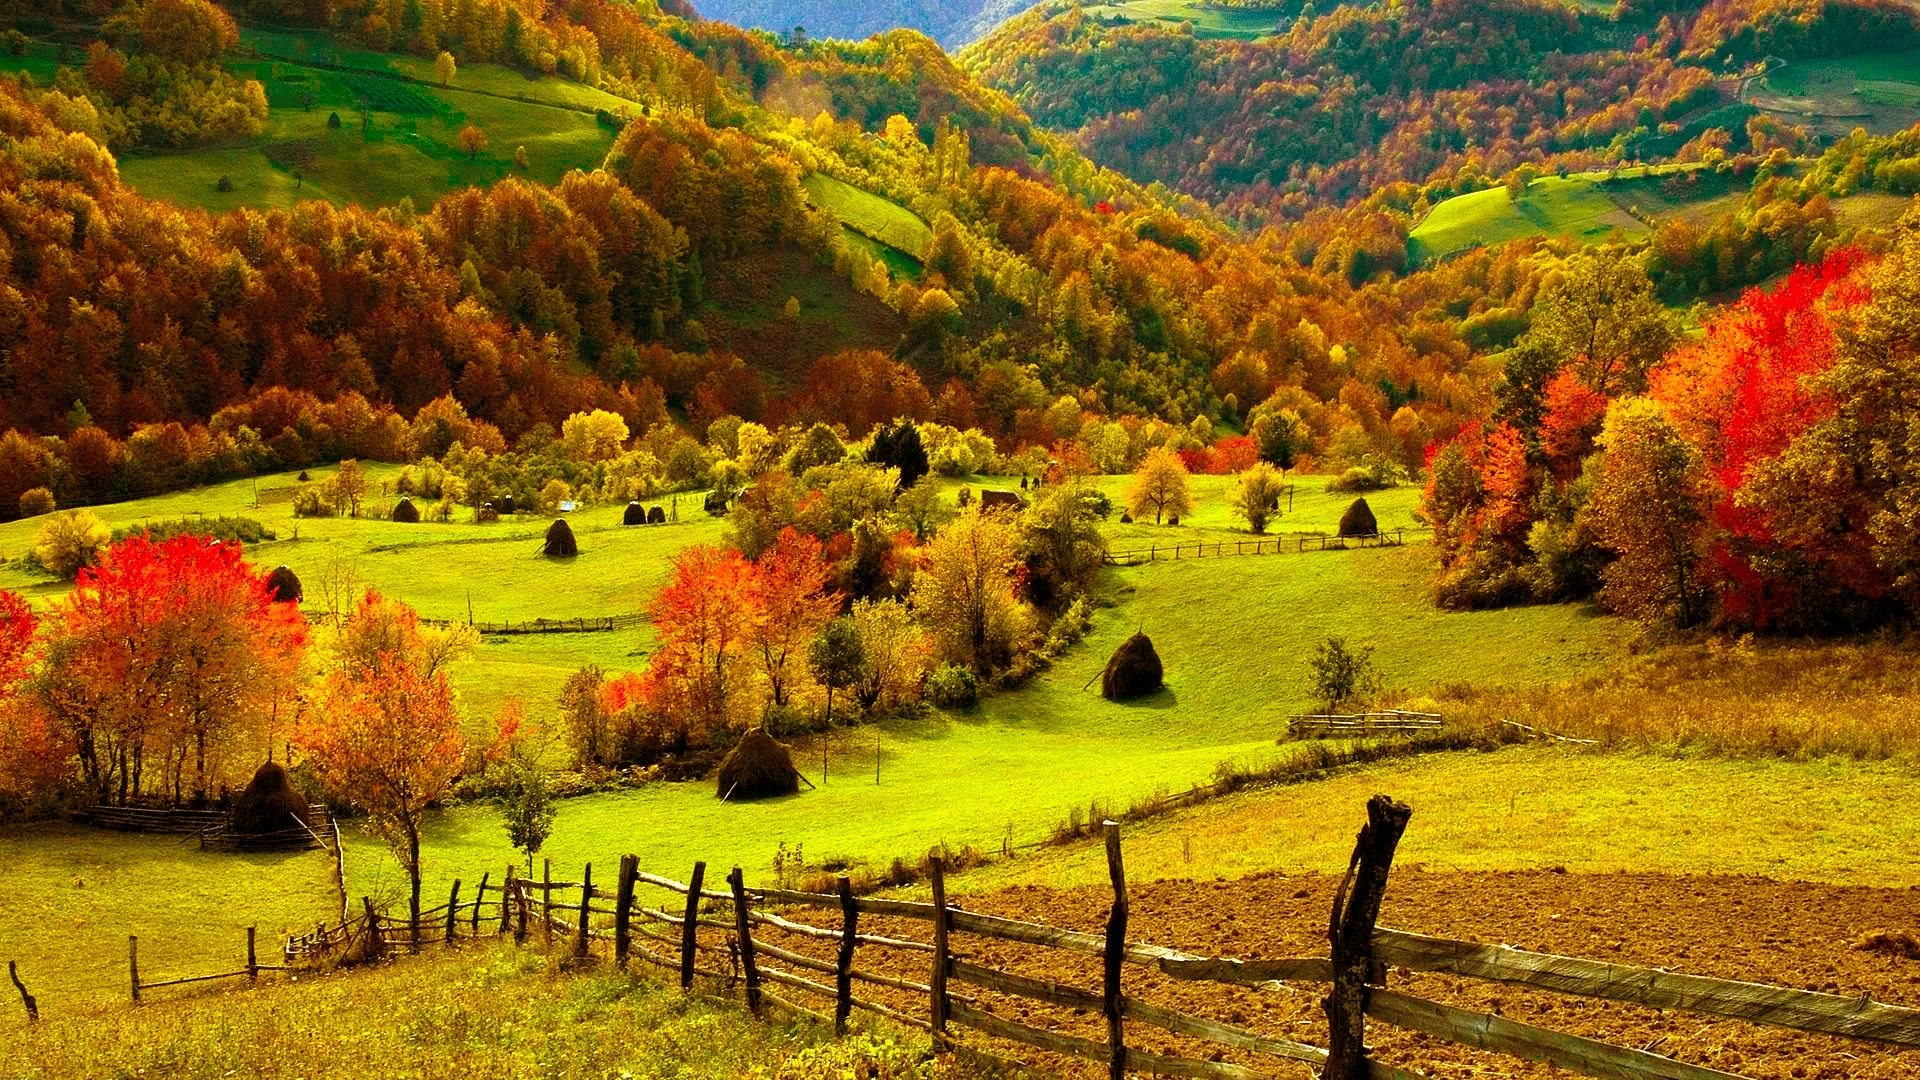  fall seasons leaves color scenic view bright wallpaper background 1920x1080